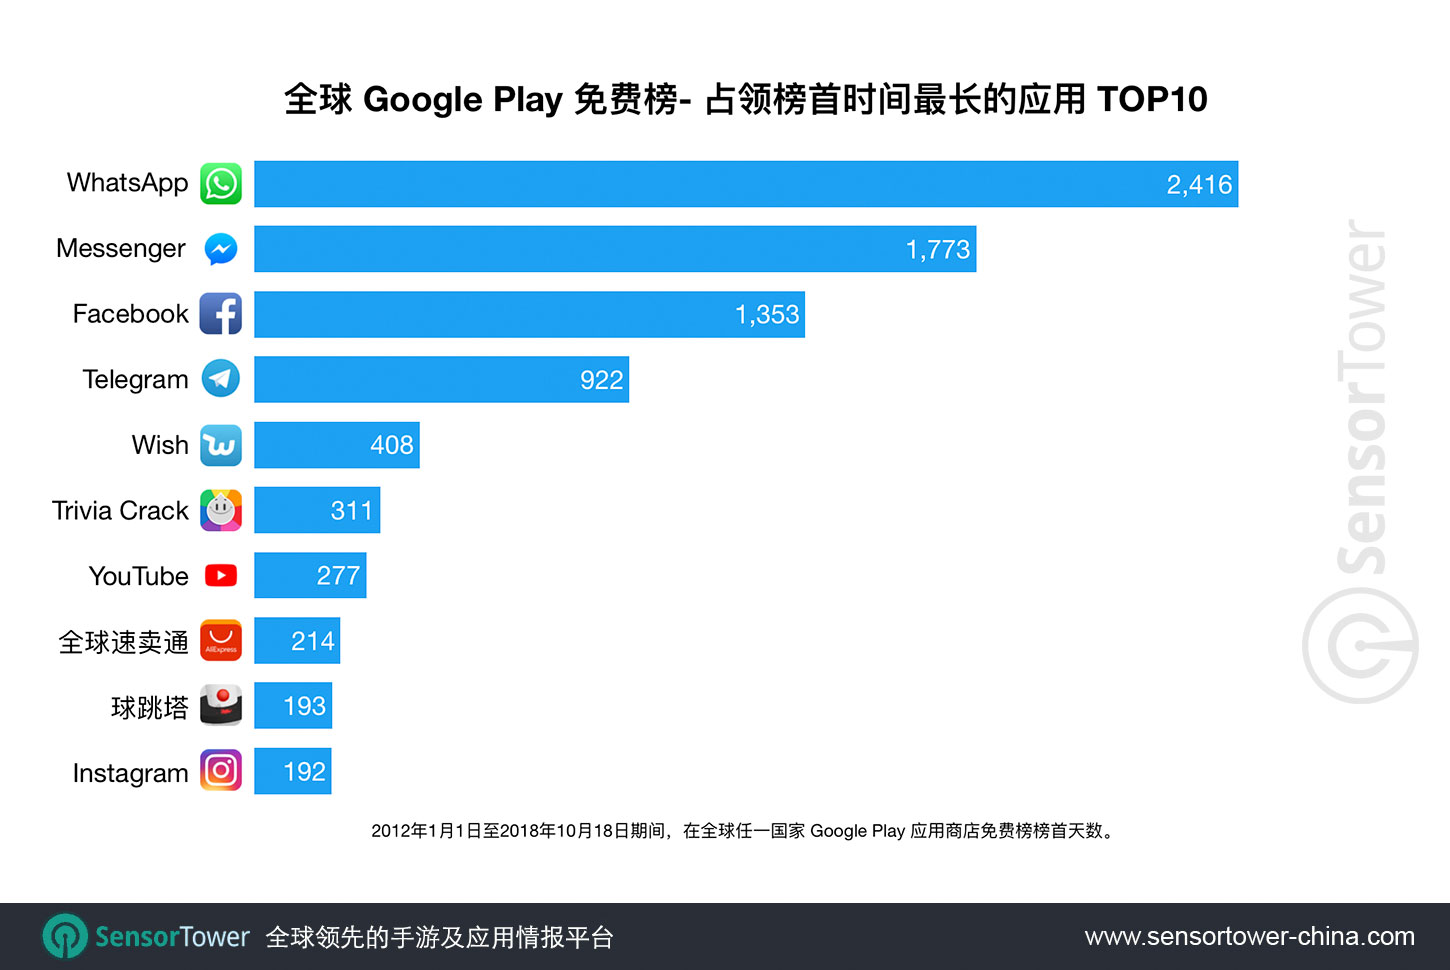 Chart showing a ranking of apps by number of days spent as No. 1 free app on the Worldwide Google Play store